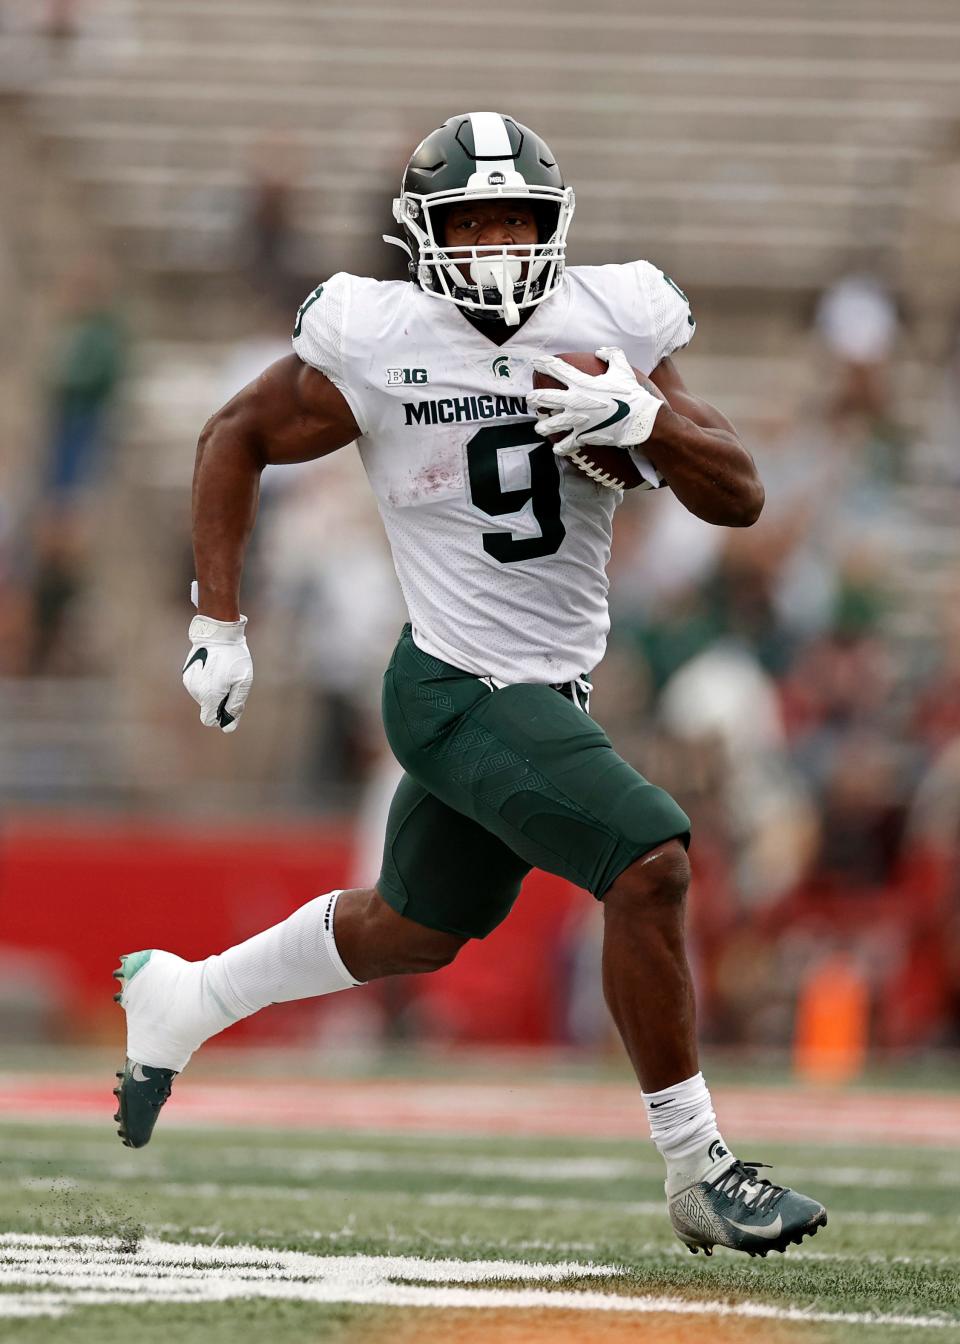 Few fans watched from the stands behind Michigan State running back Kenneth Walker III as he ran against host Rutgers during the second half of their Big Ten Conference matchup on Oct. 9. Nationally-ranked Michigan State won 31-13.